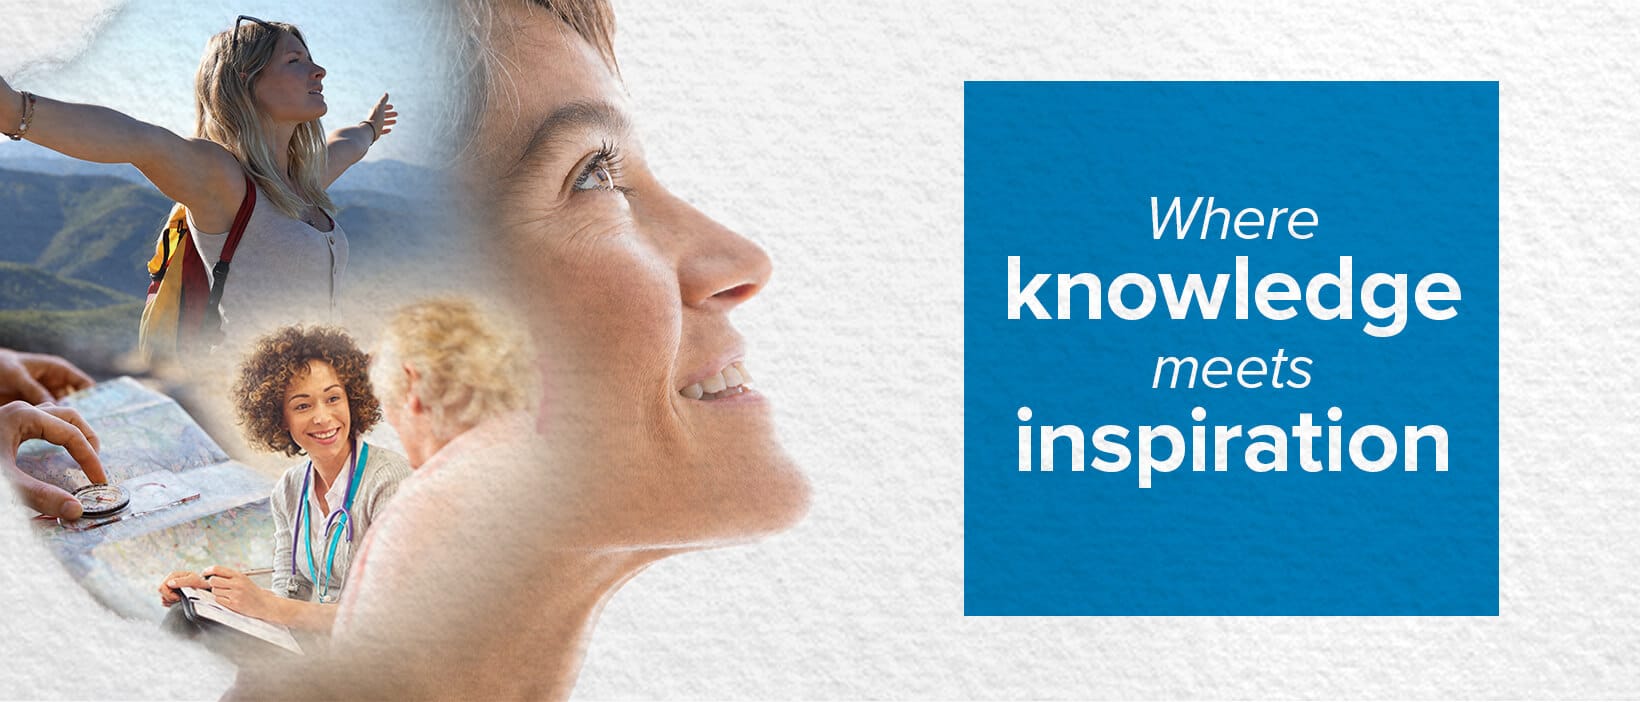 PAH knowledge meets inspiration banner